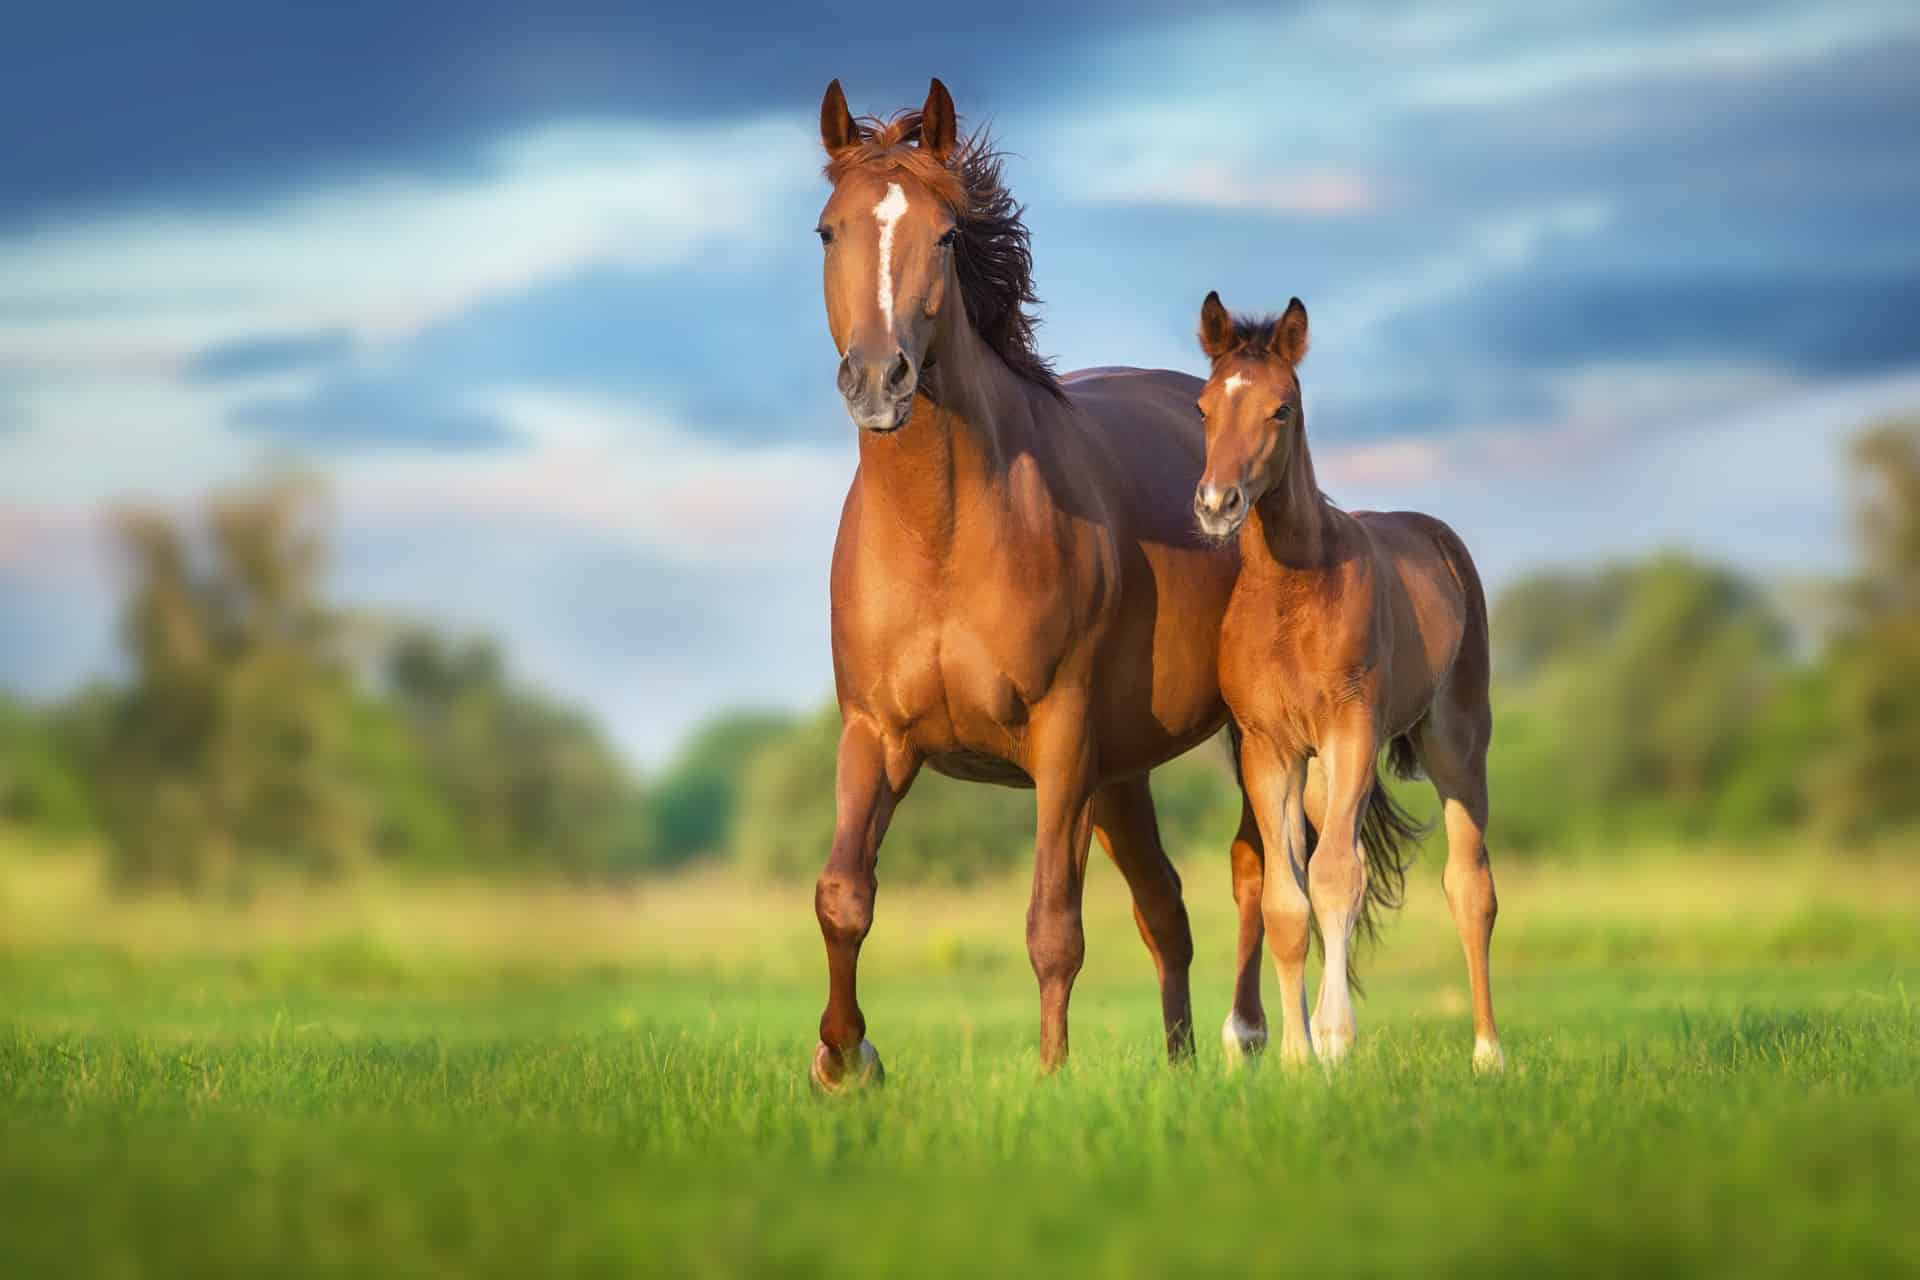 This is a photo of two horses trotting through a grassy field.